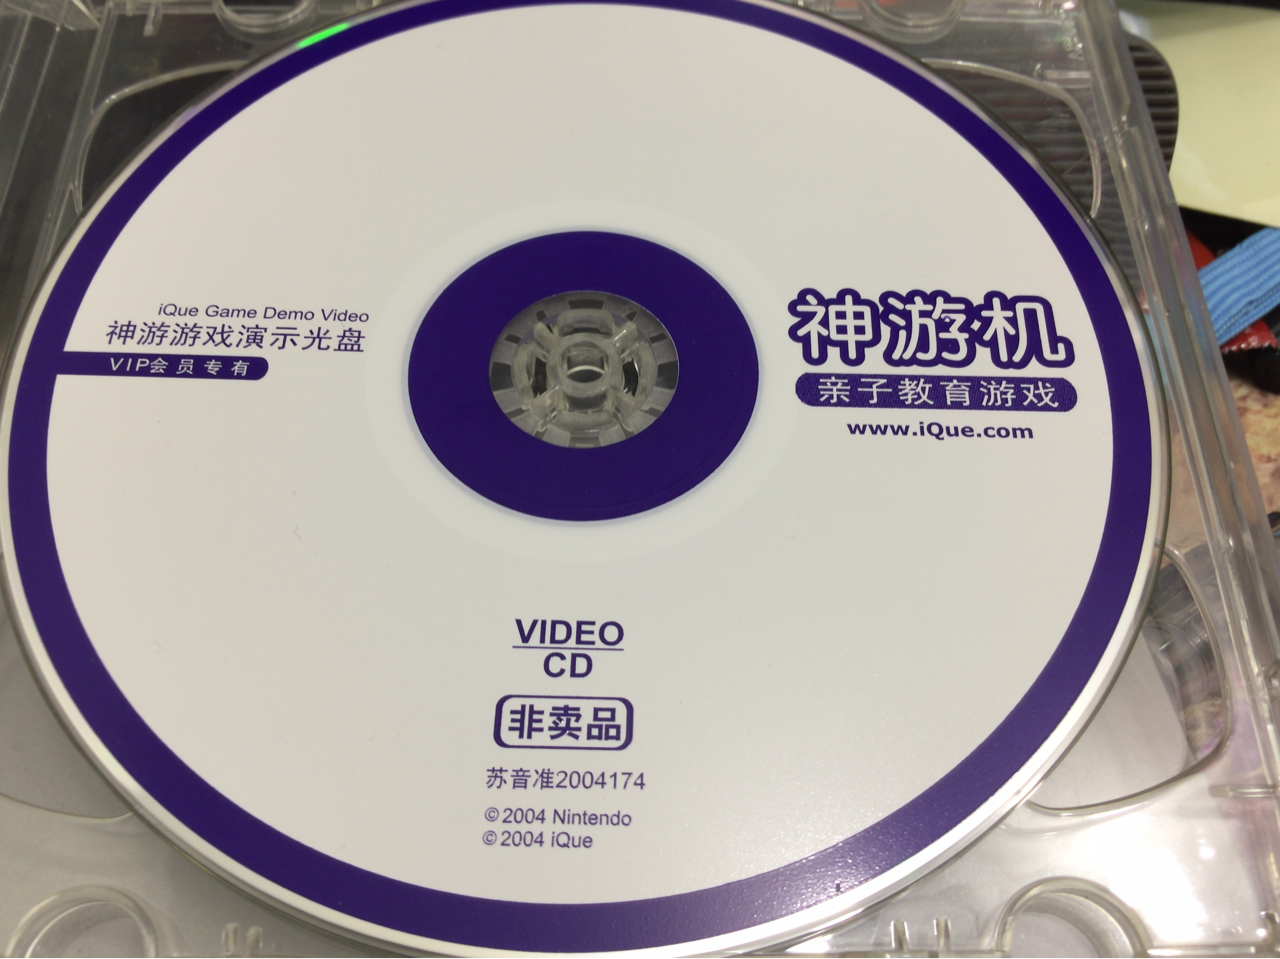 iQue Game Demo Video VCD.png